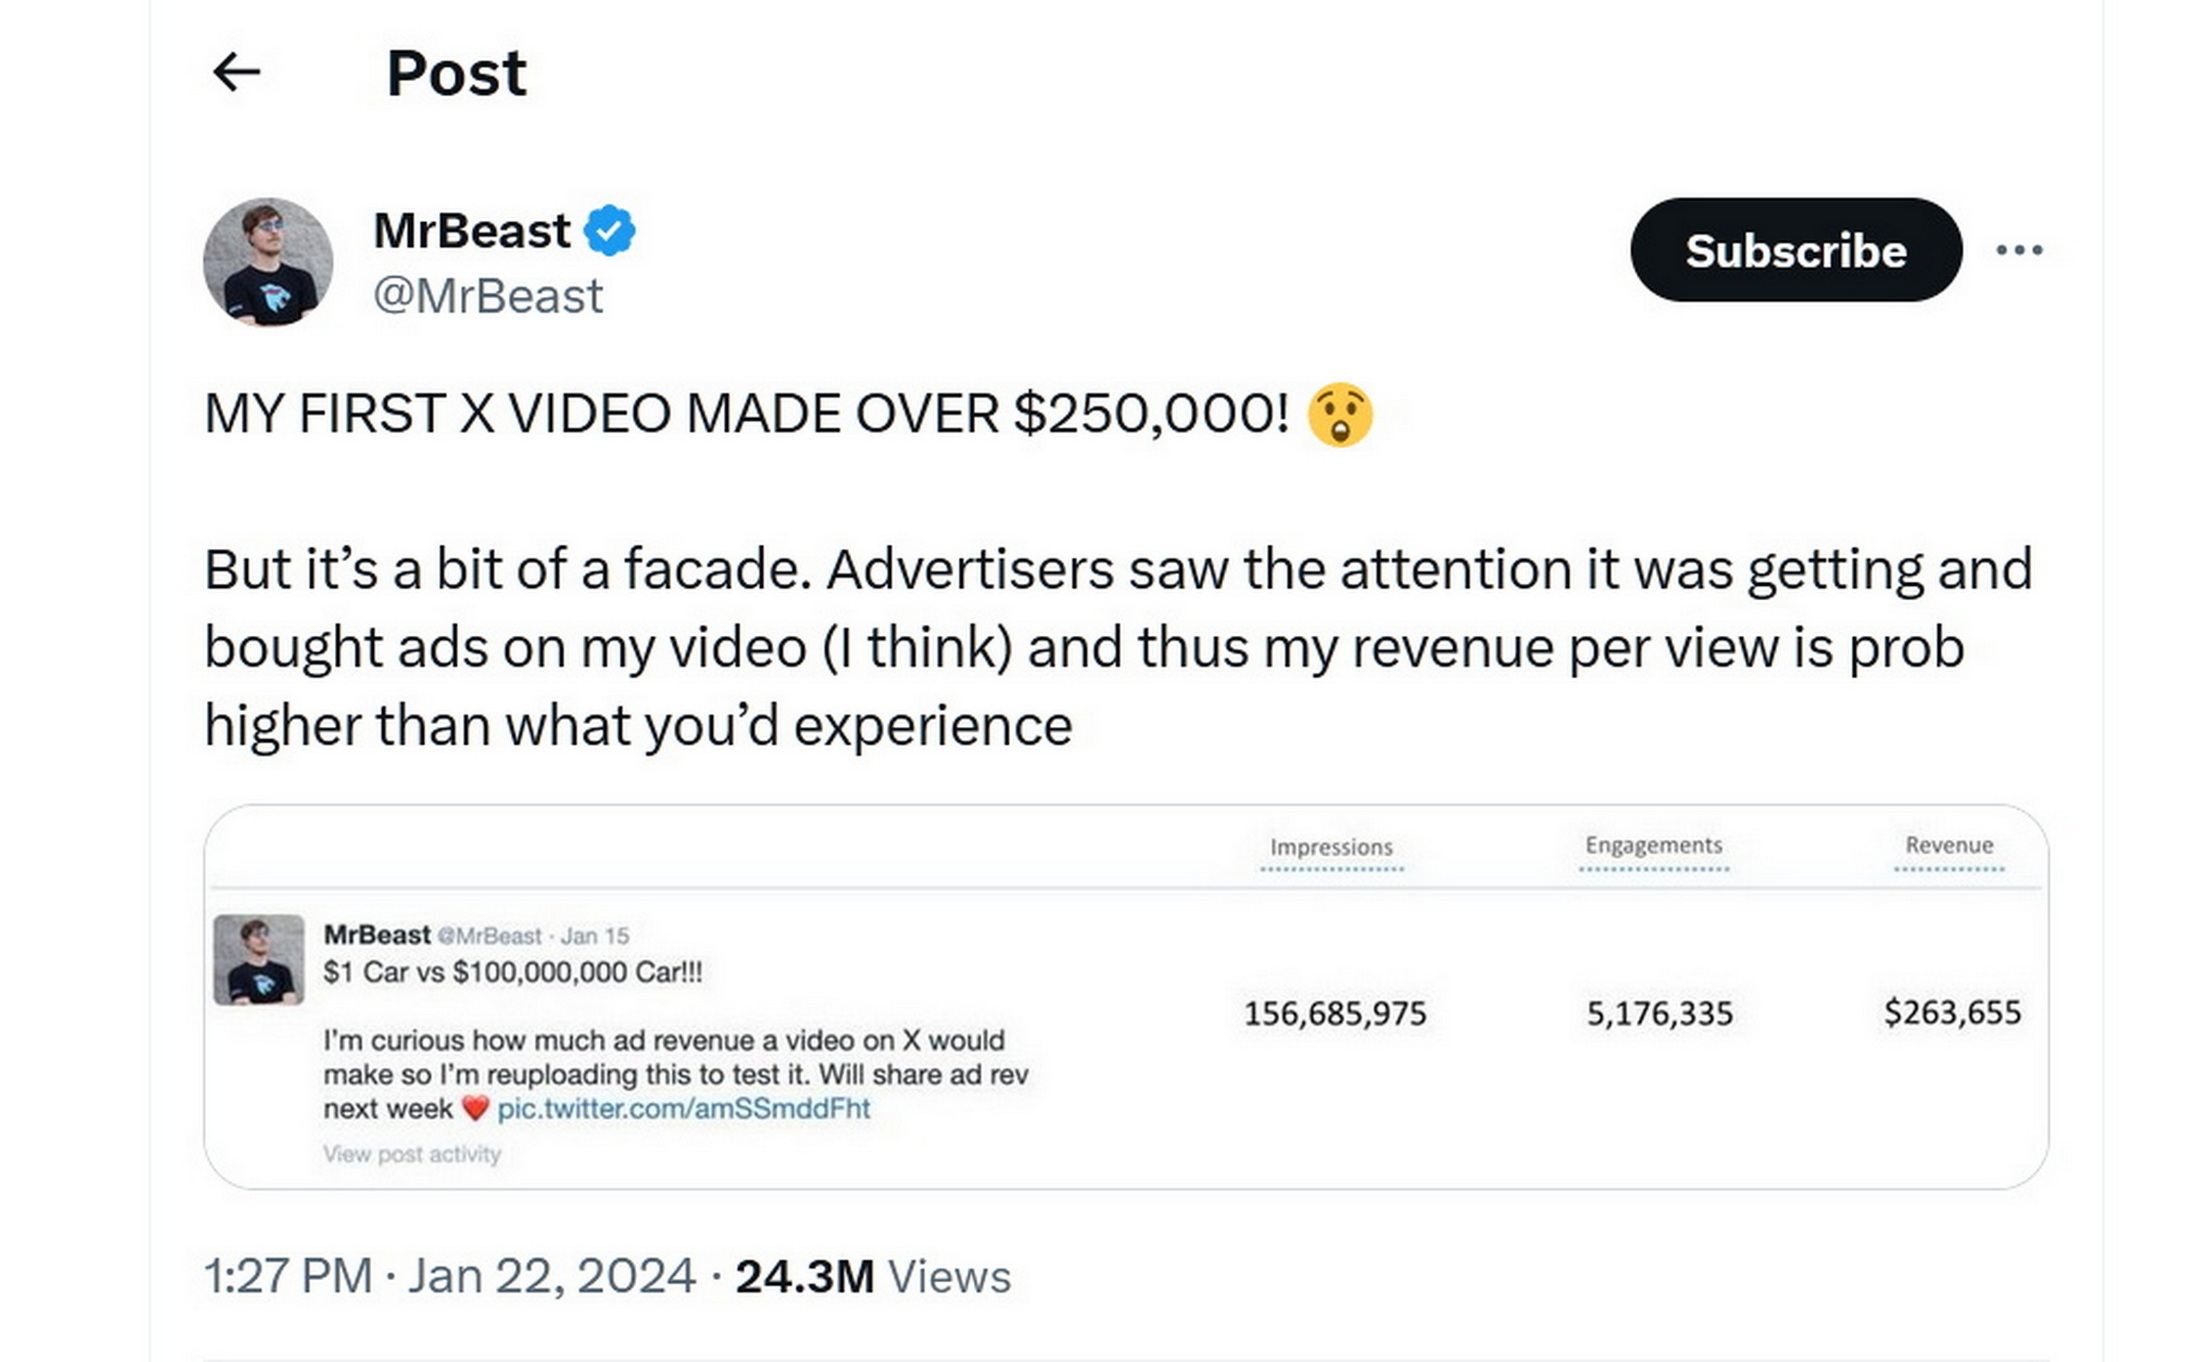 Mr. Beast posts video to X, receives thousands